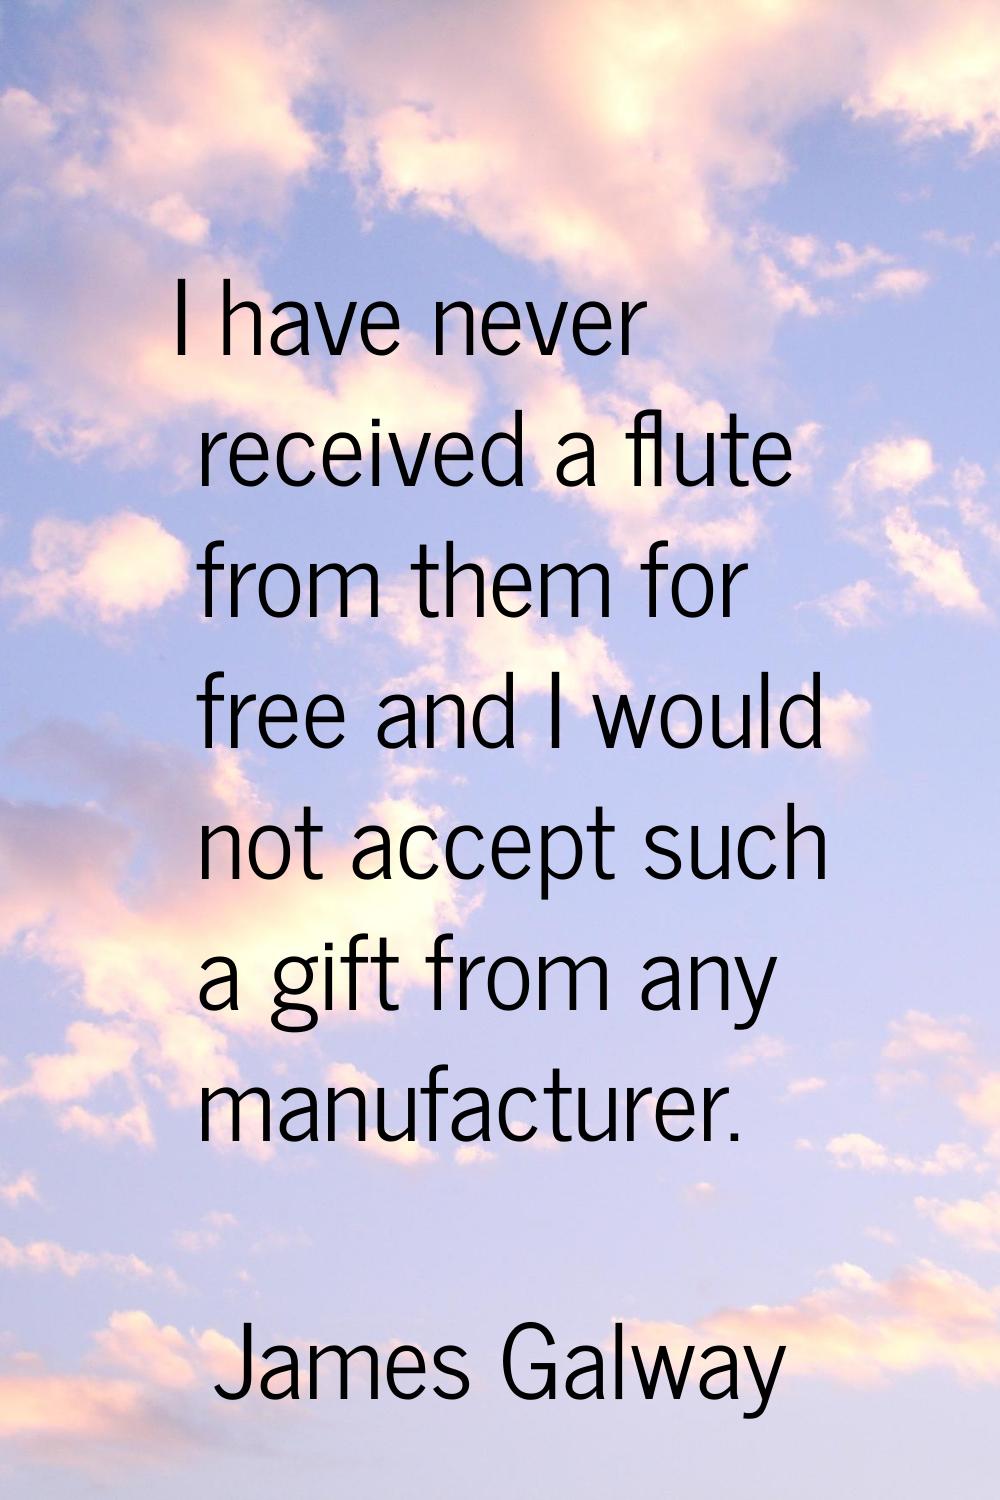 I have never received a flute from them for free and I would not accept such a gift from any manufa